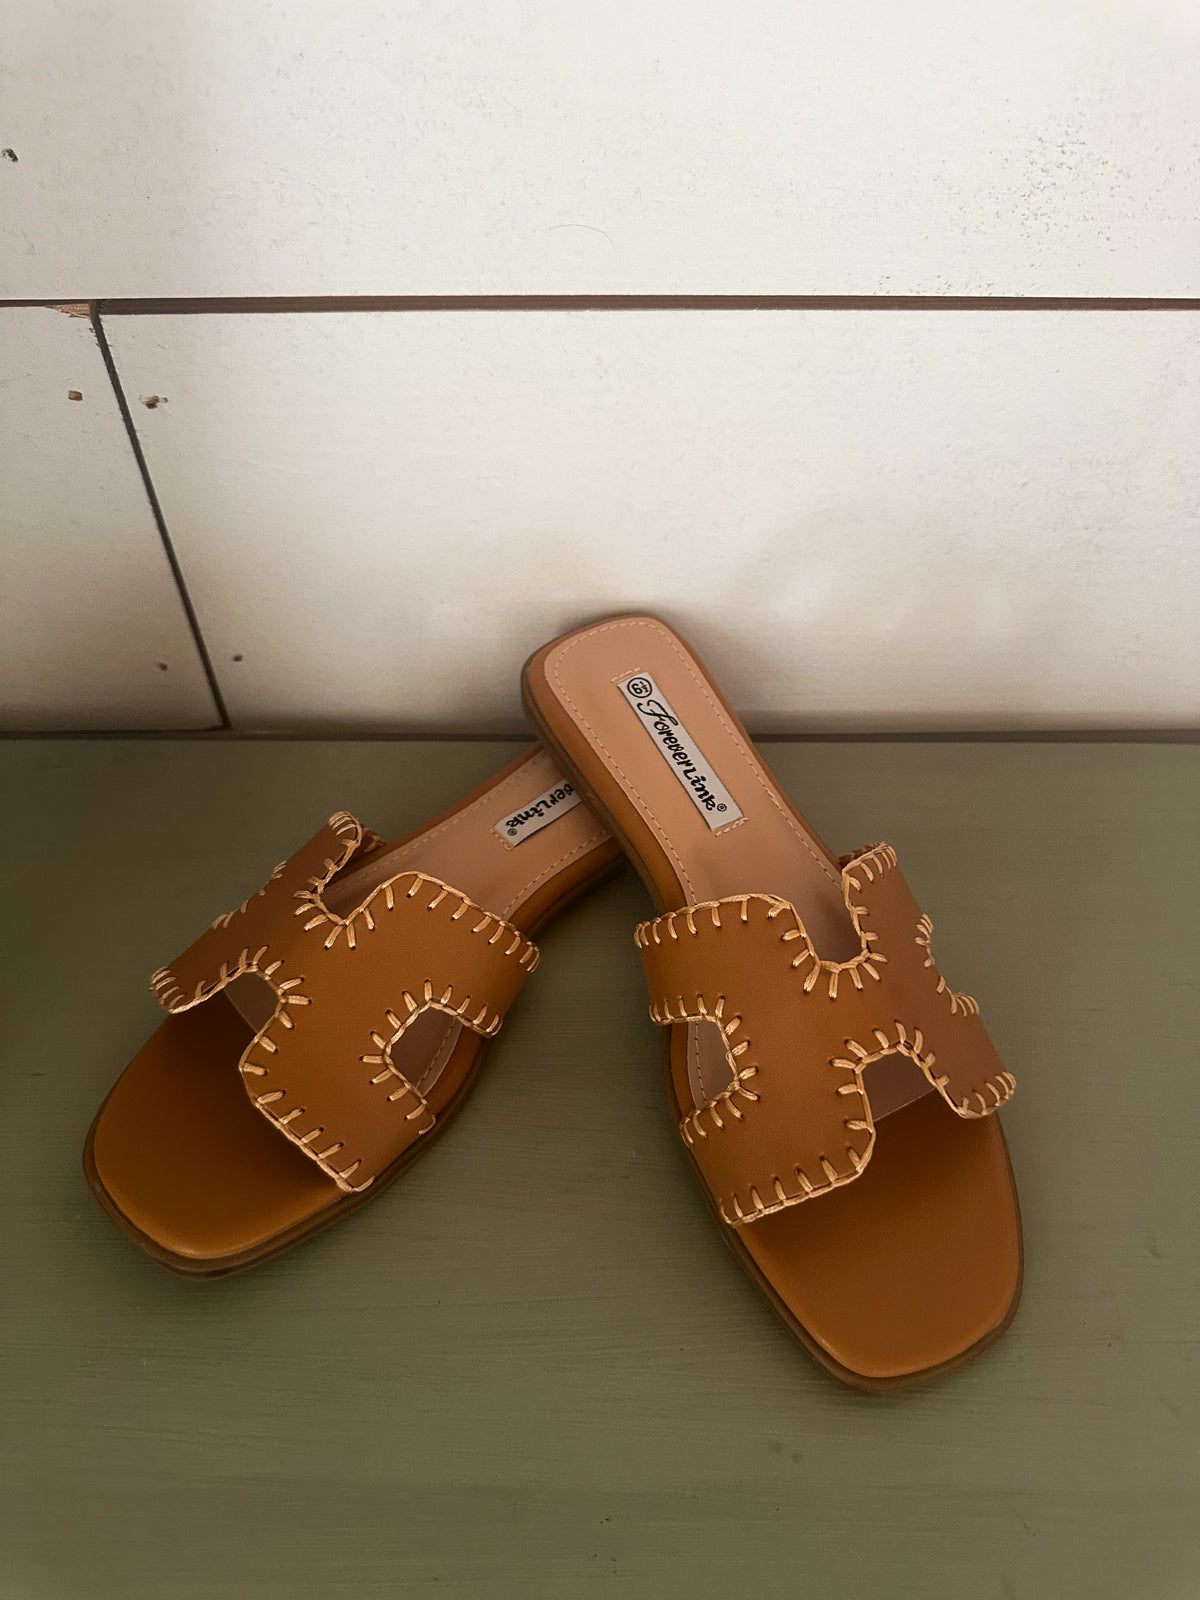 The Perfect Tan Sandals